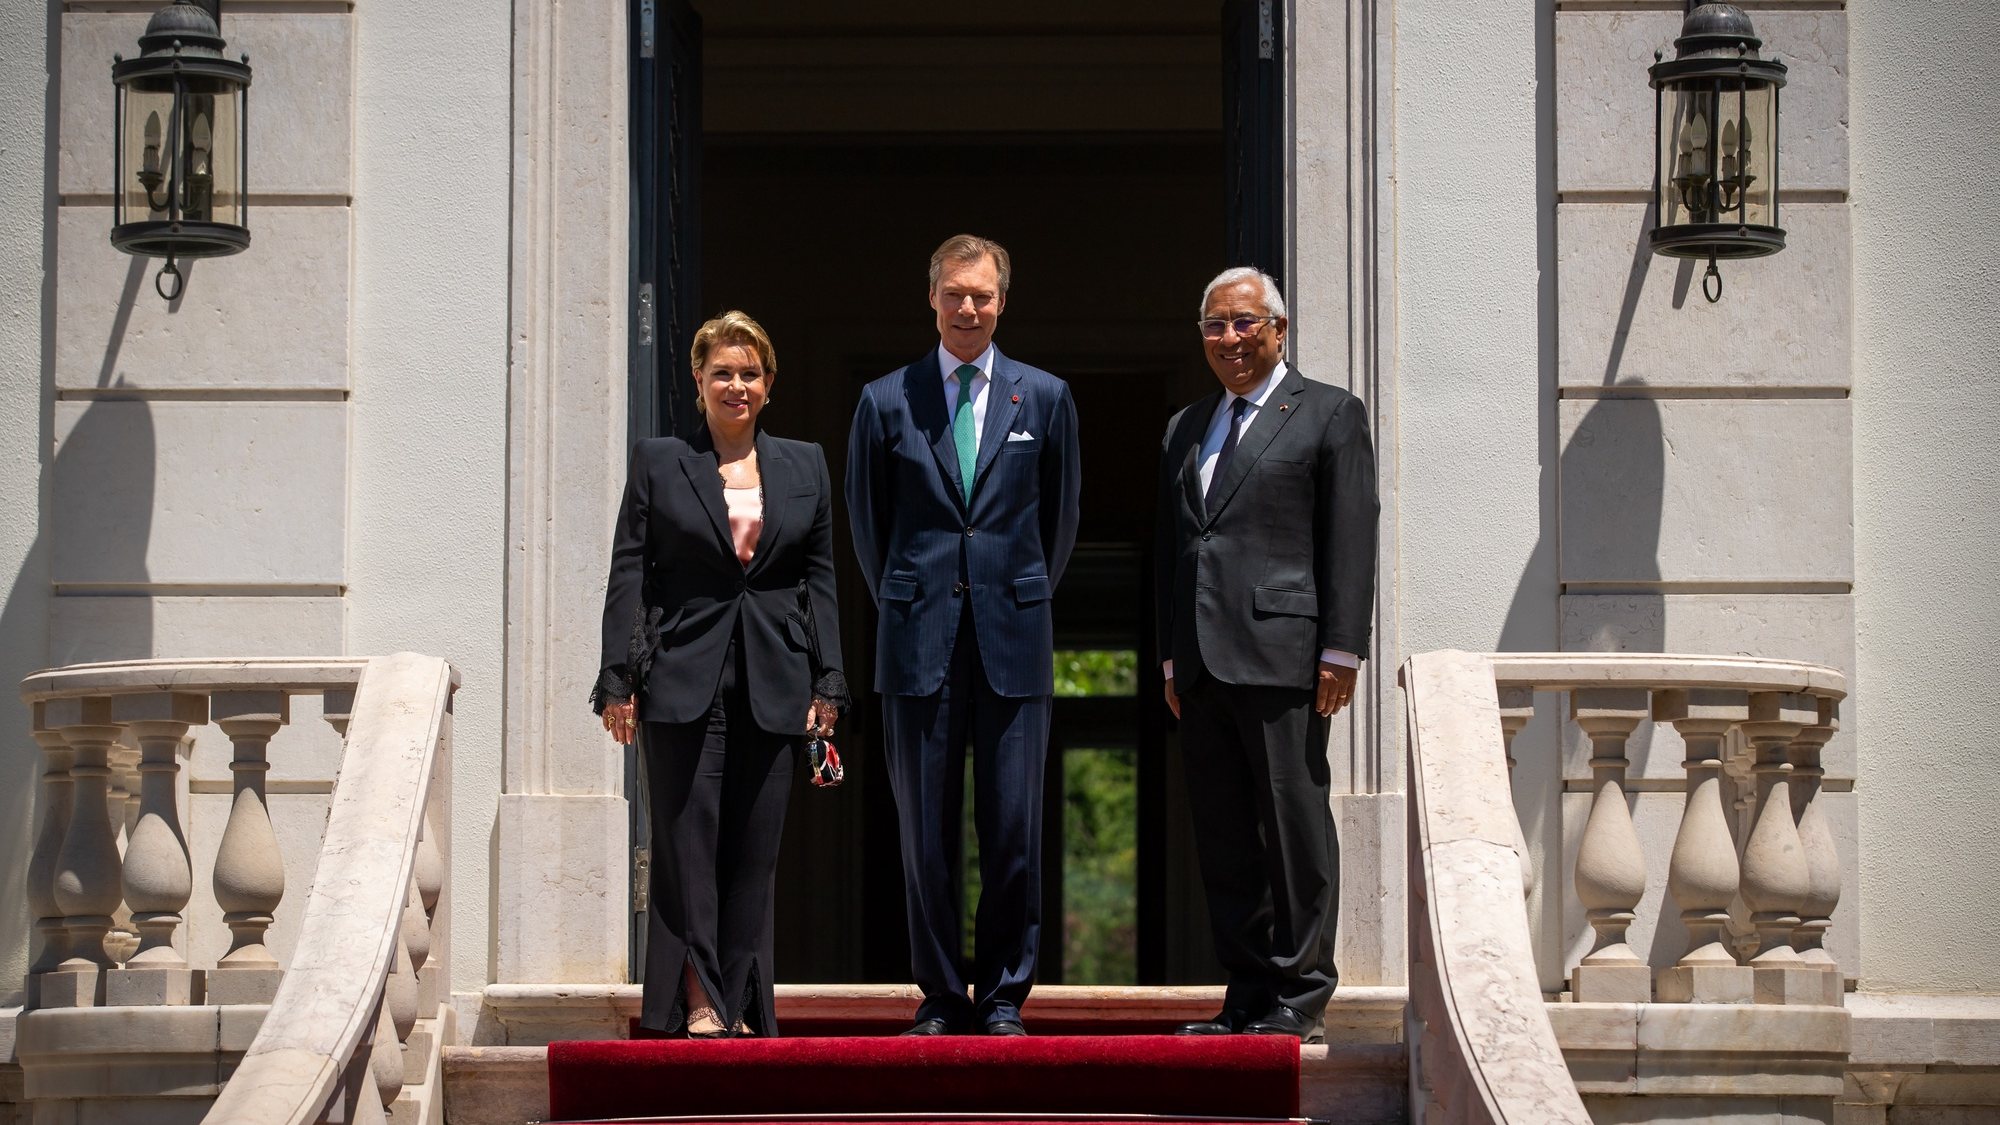 epa09942263 The Grand Duke Henri of Luxembourg (C) and his wife Grand Duchess Maria Teresa of Luxembourg (L), pose for a photograph with the Portuguese Prime Minister, Antonio Costa (R), on arrival at Sao Bento Palace on the second day of a two day official visit to Portugal, in Lisbon, 12 May 2022.  EPA/JOSE SENA GOULAO